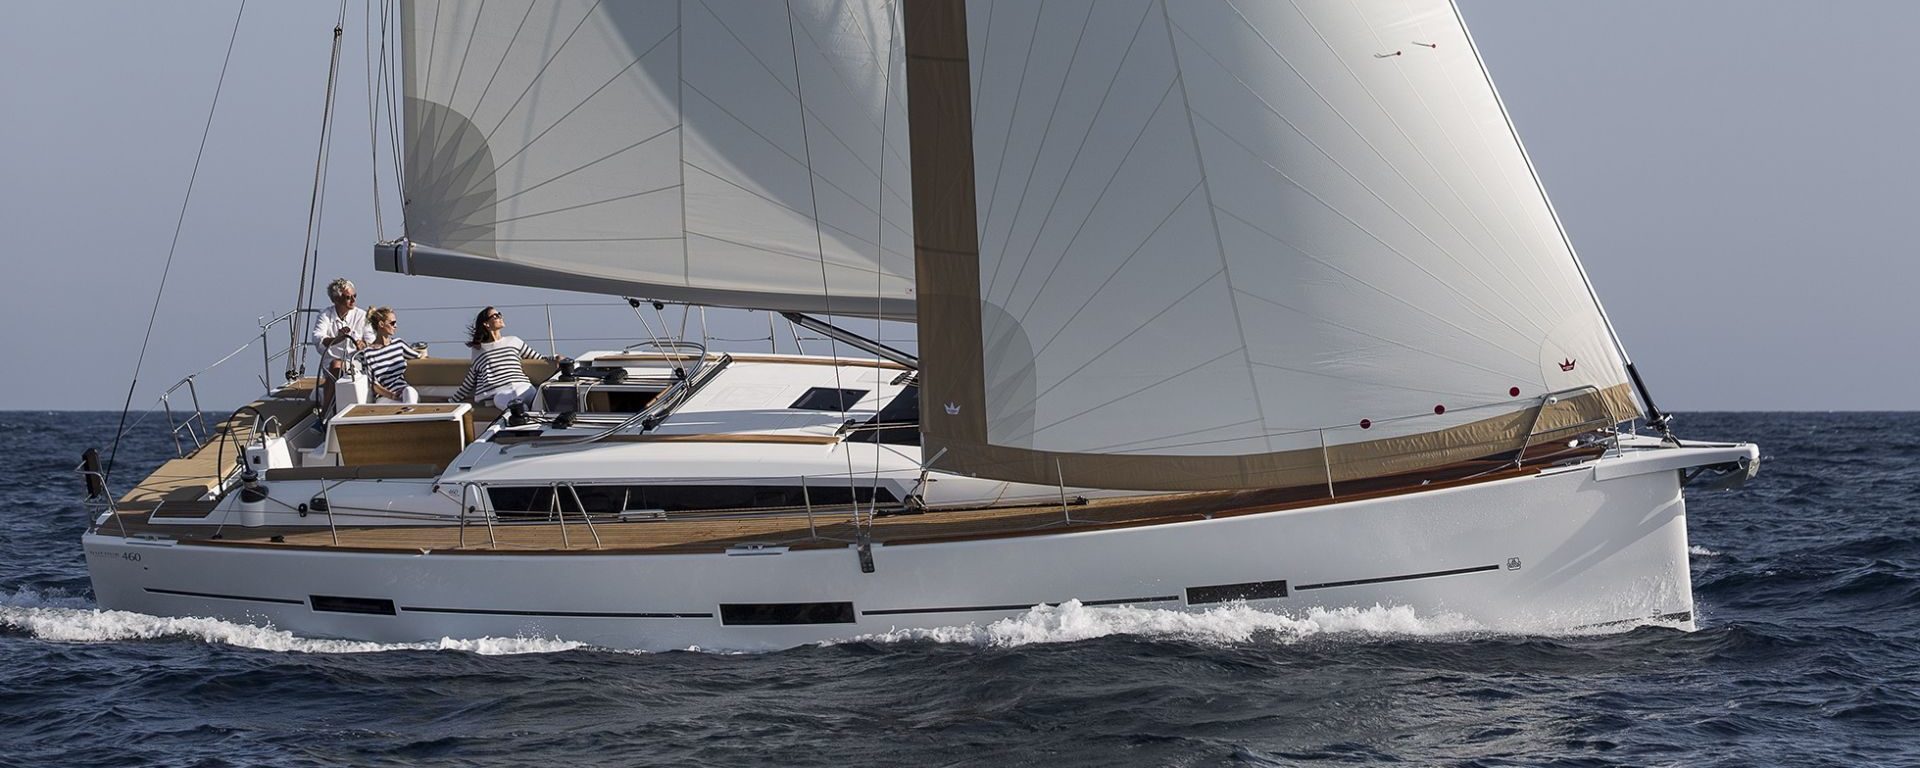 Dufour yachts 460 sailing open waters